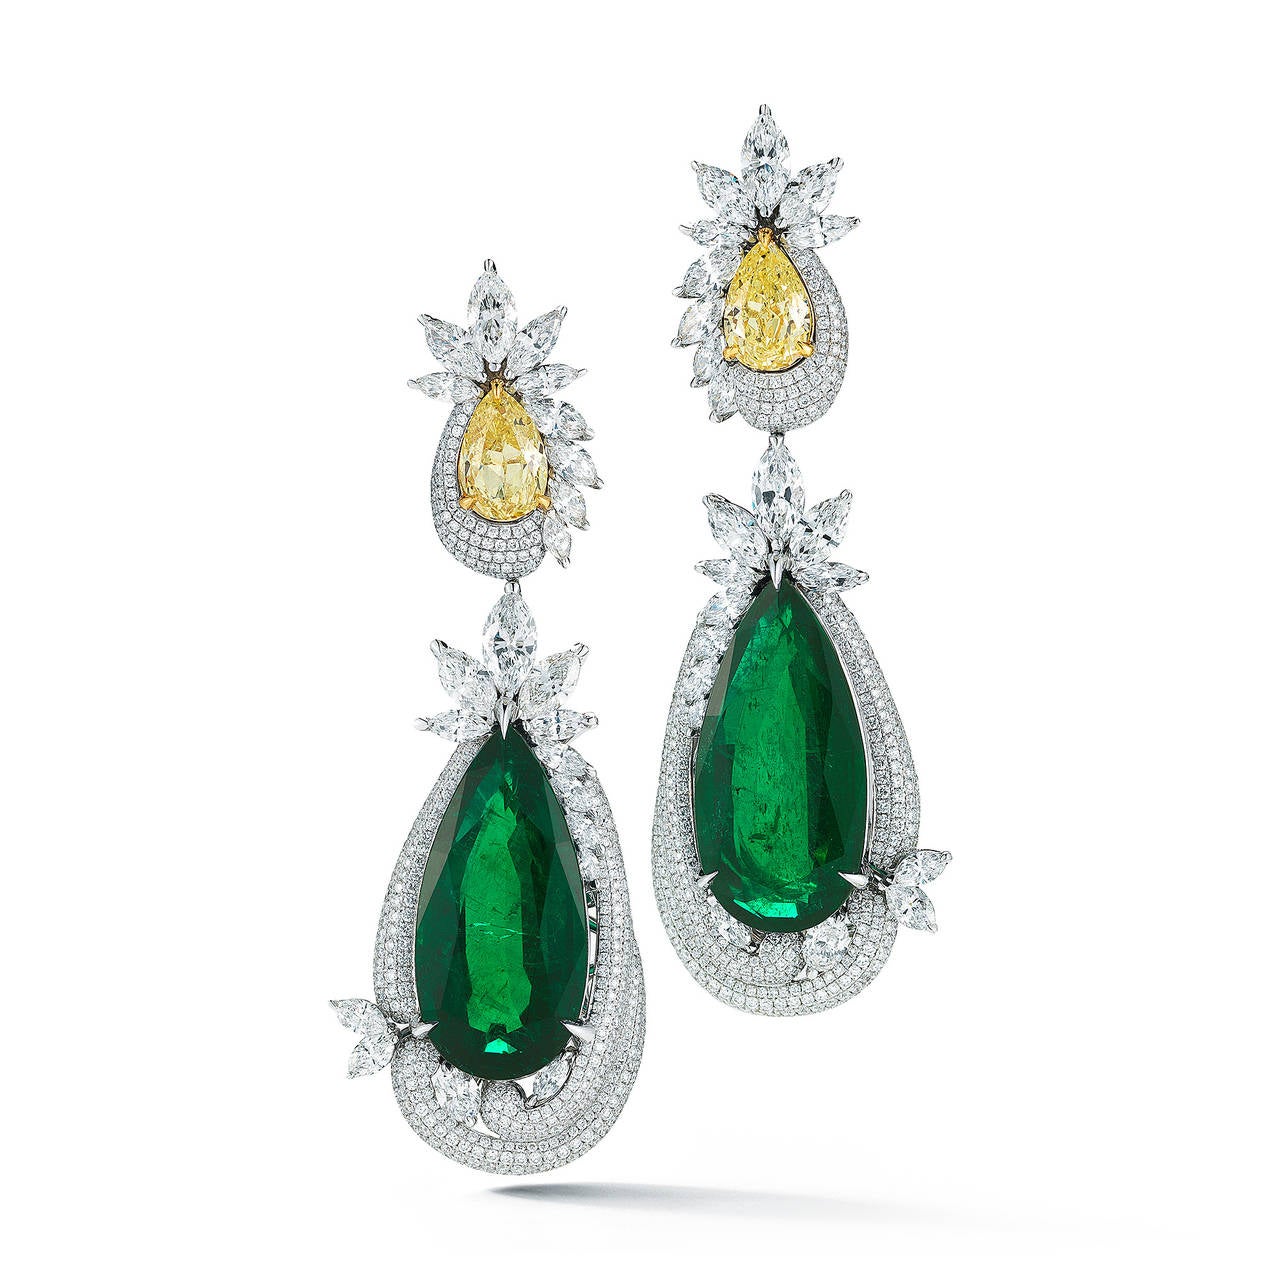 Amazing Zambian Emerald Pear-Shape Earring With Fancy Yellow & White Diamonds. This Emerald is Certified By GIA.
Product ID:02366
Model:TK MB 527
Metal:18K W
Gram Weight:52.20
Stock:1
Country Of Origin:USA
DIAMOND
•  RD: 9.10Ct.
• 